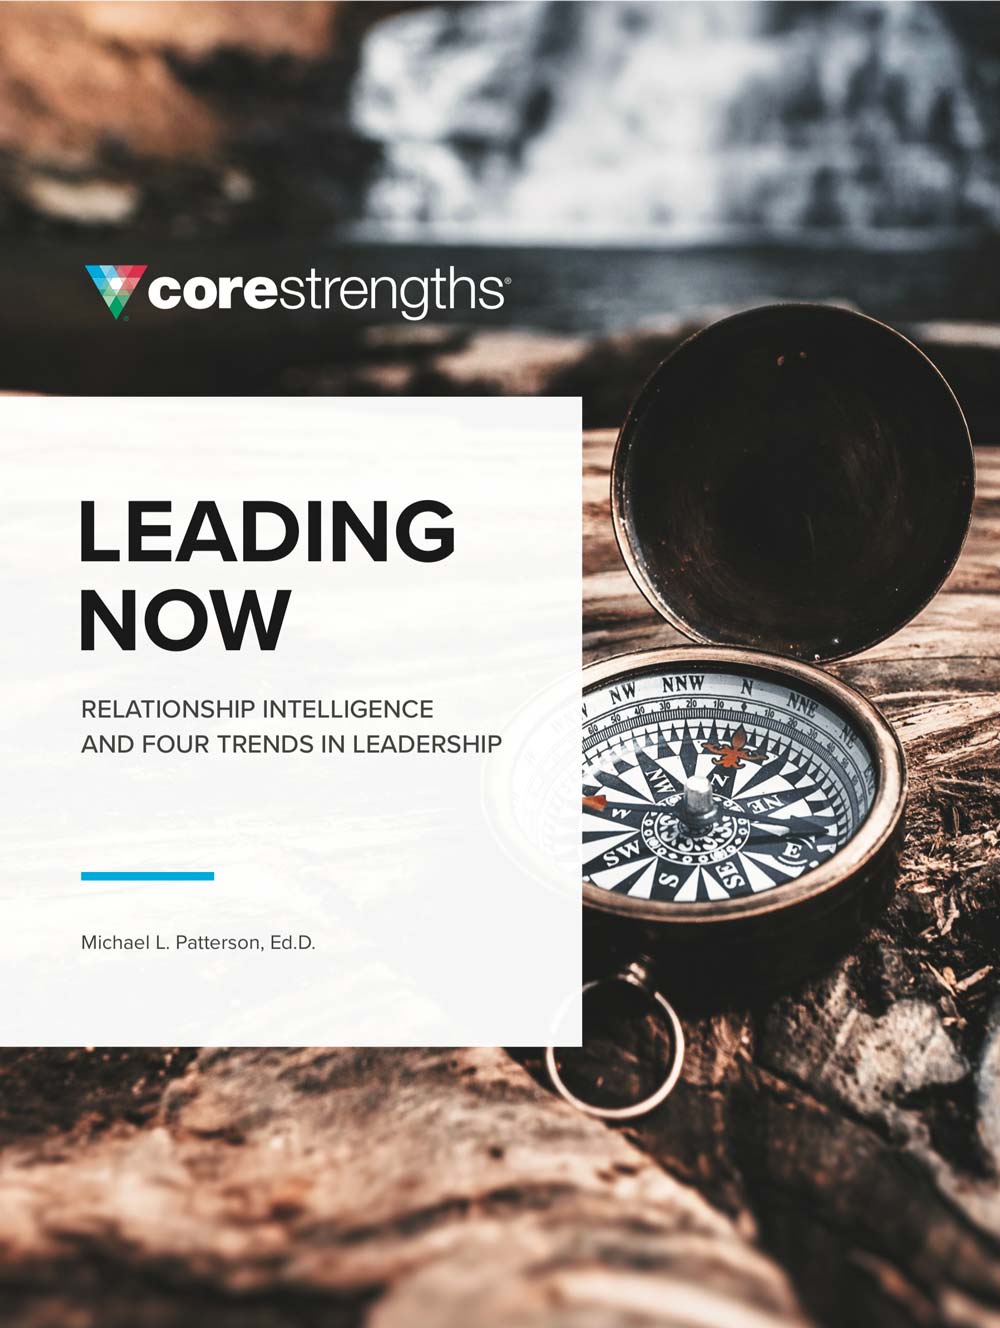 Leading now book cover, a guide to core strengths' leadership development solutions